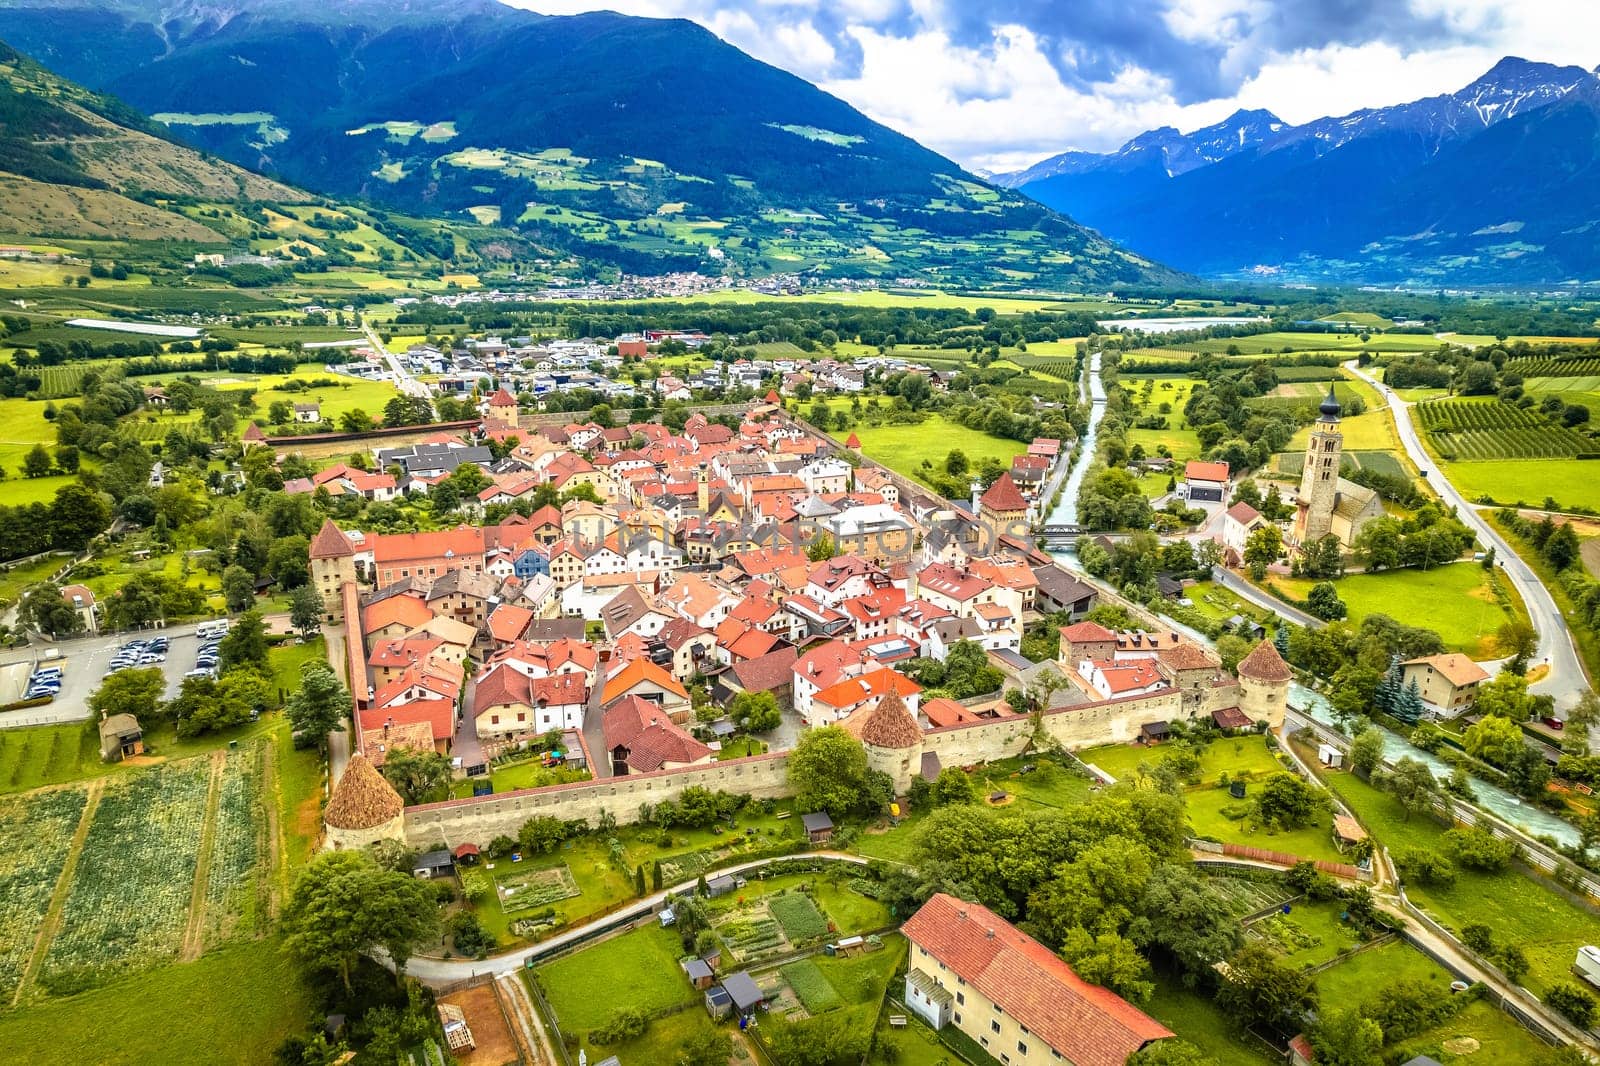 Fortified village of Glorenza or Glurns in Val Venosta aerial view. Trentino region of Italy